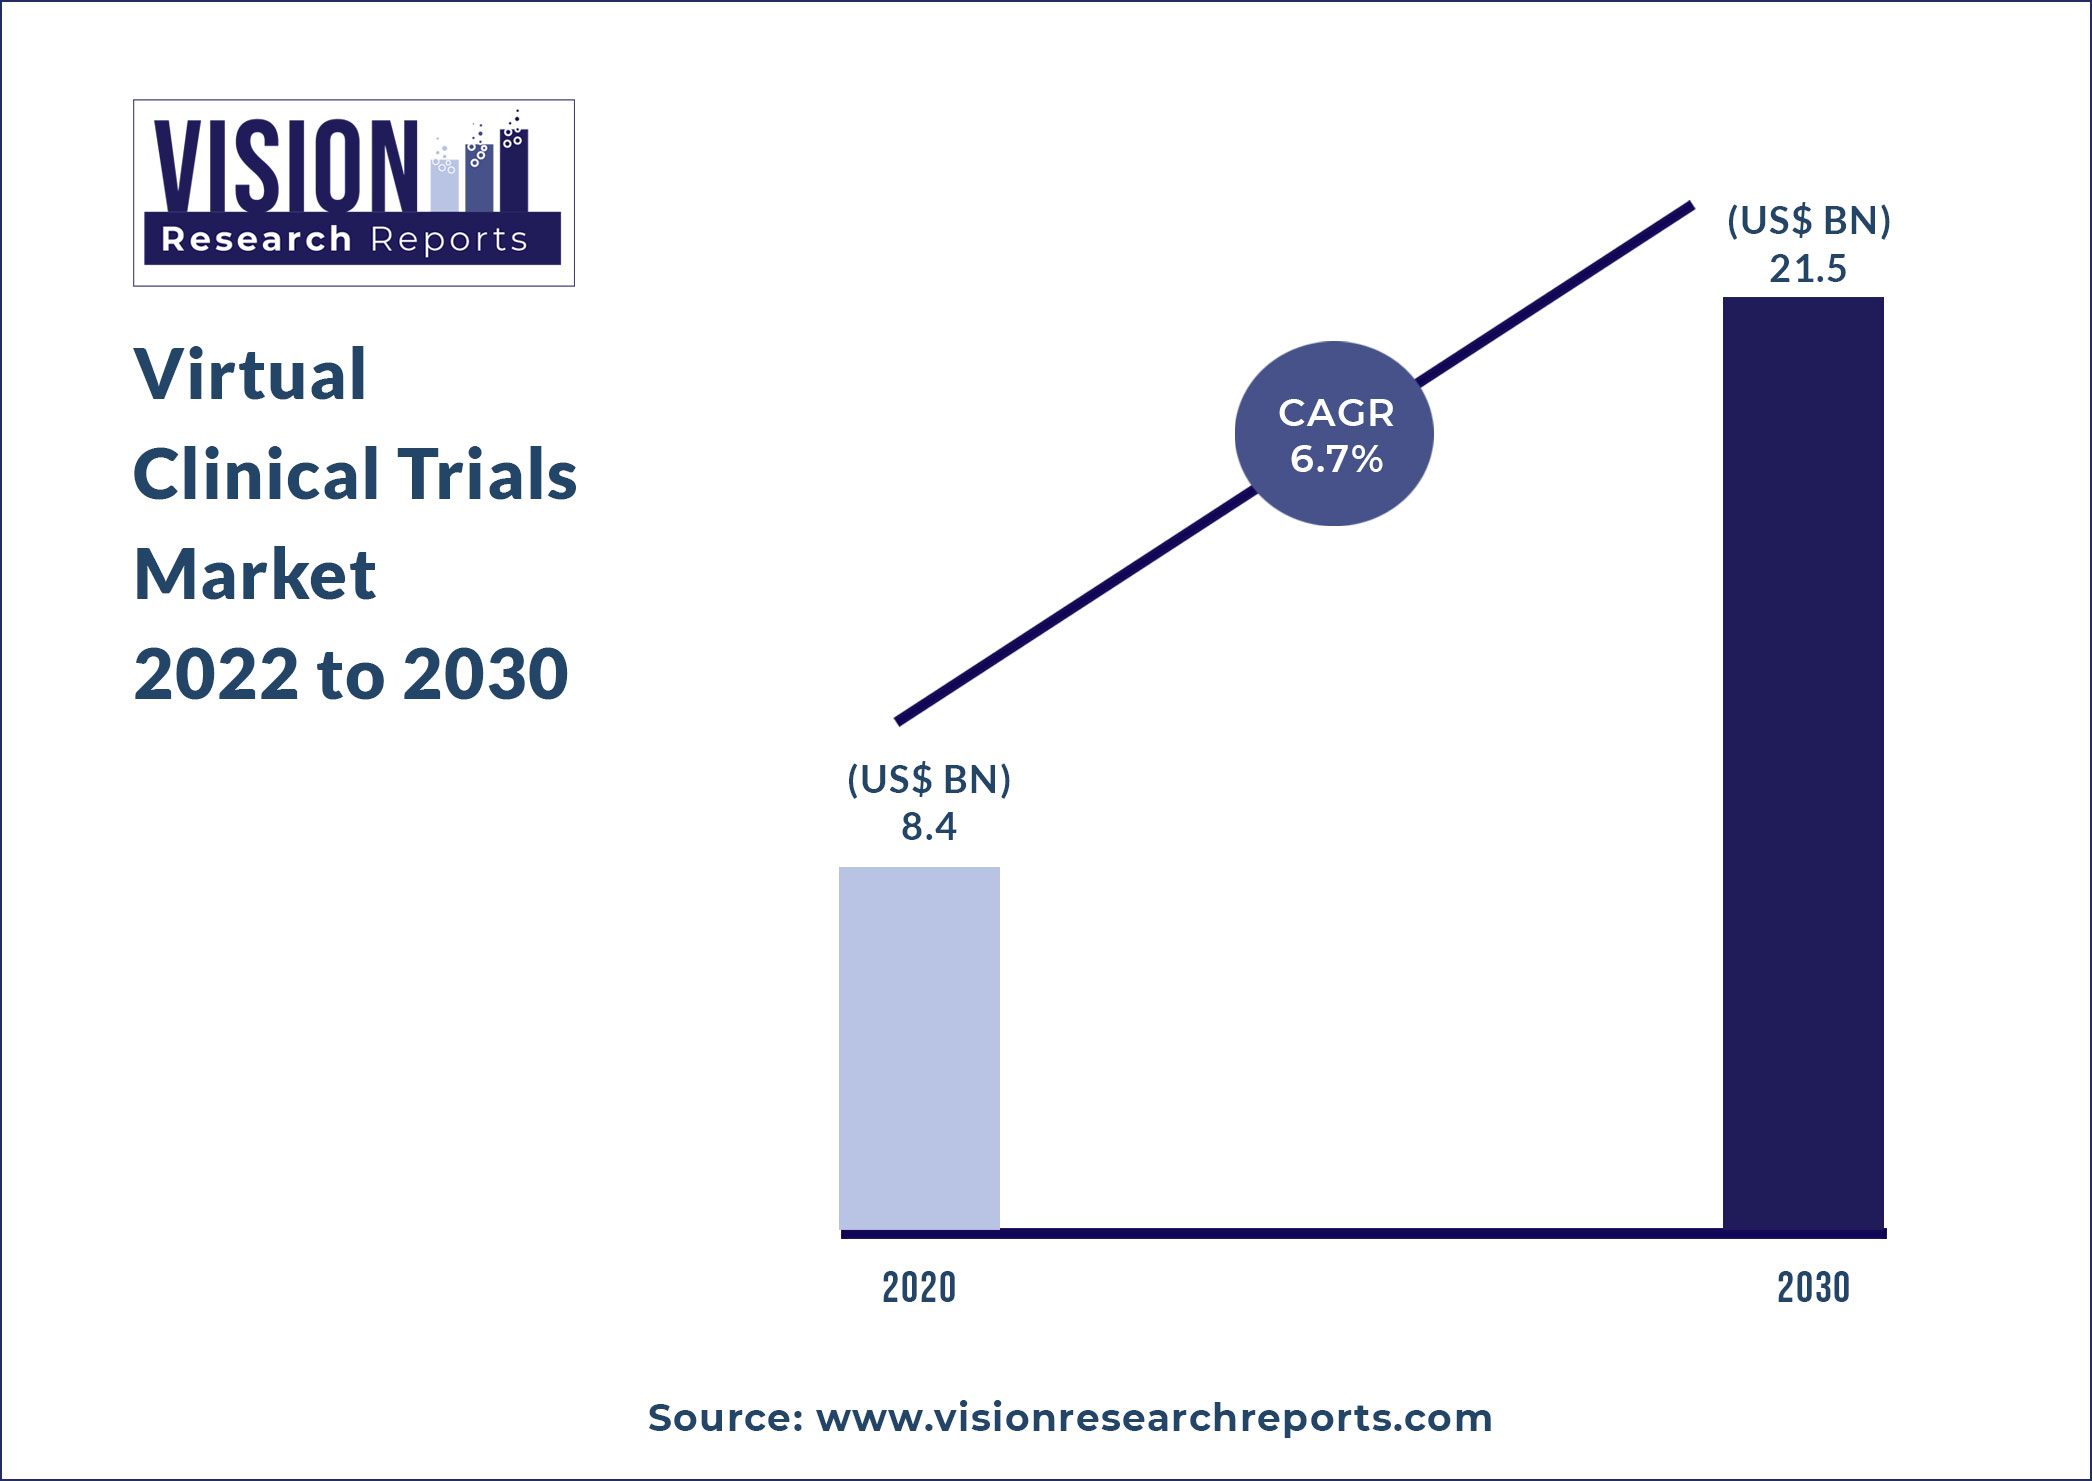 Virtual Clinical Trials Market Size 2022 to 2030